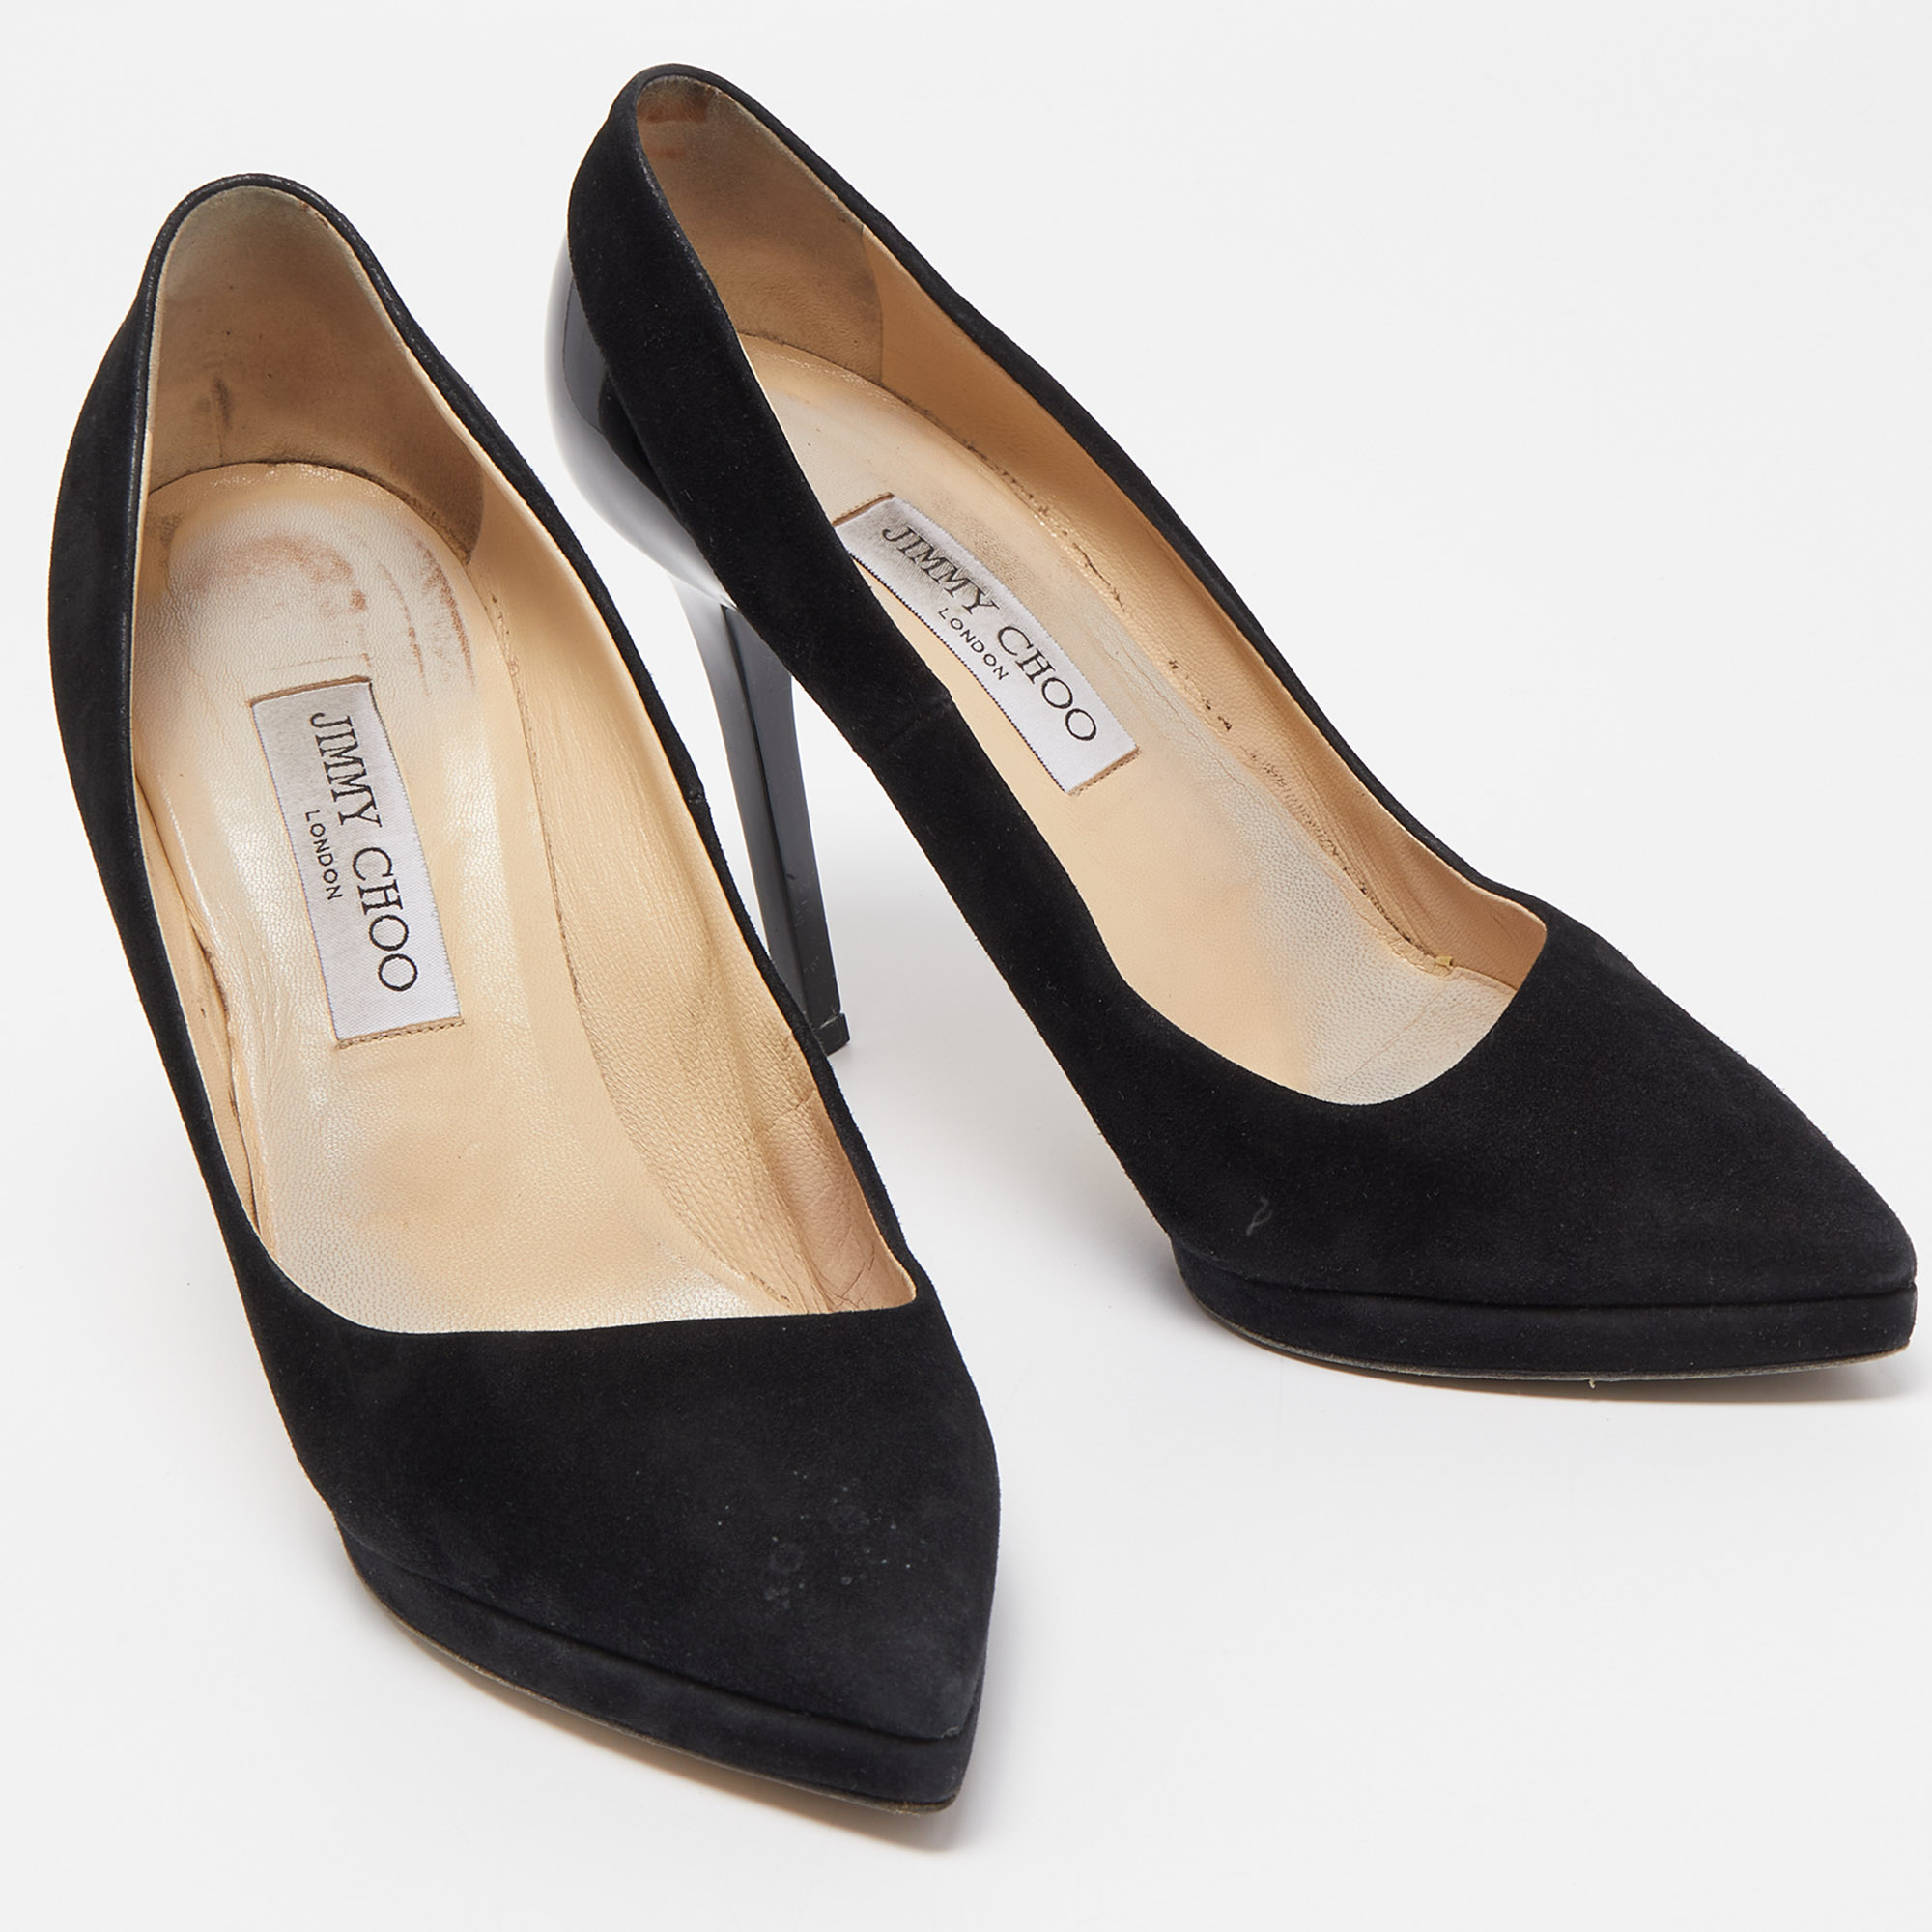 Jimmy Choo Black Suede And Patent Leather Platform Pumps Size 39.5